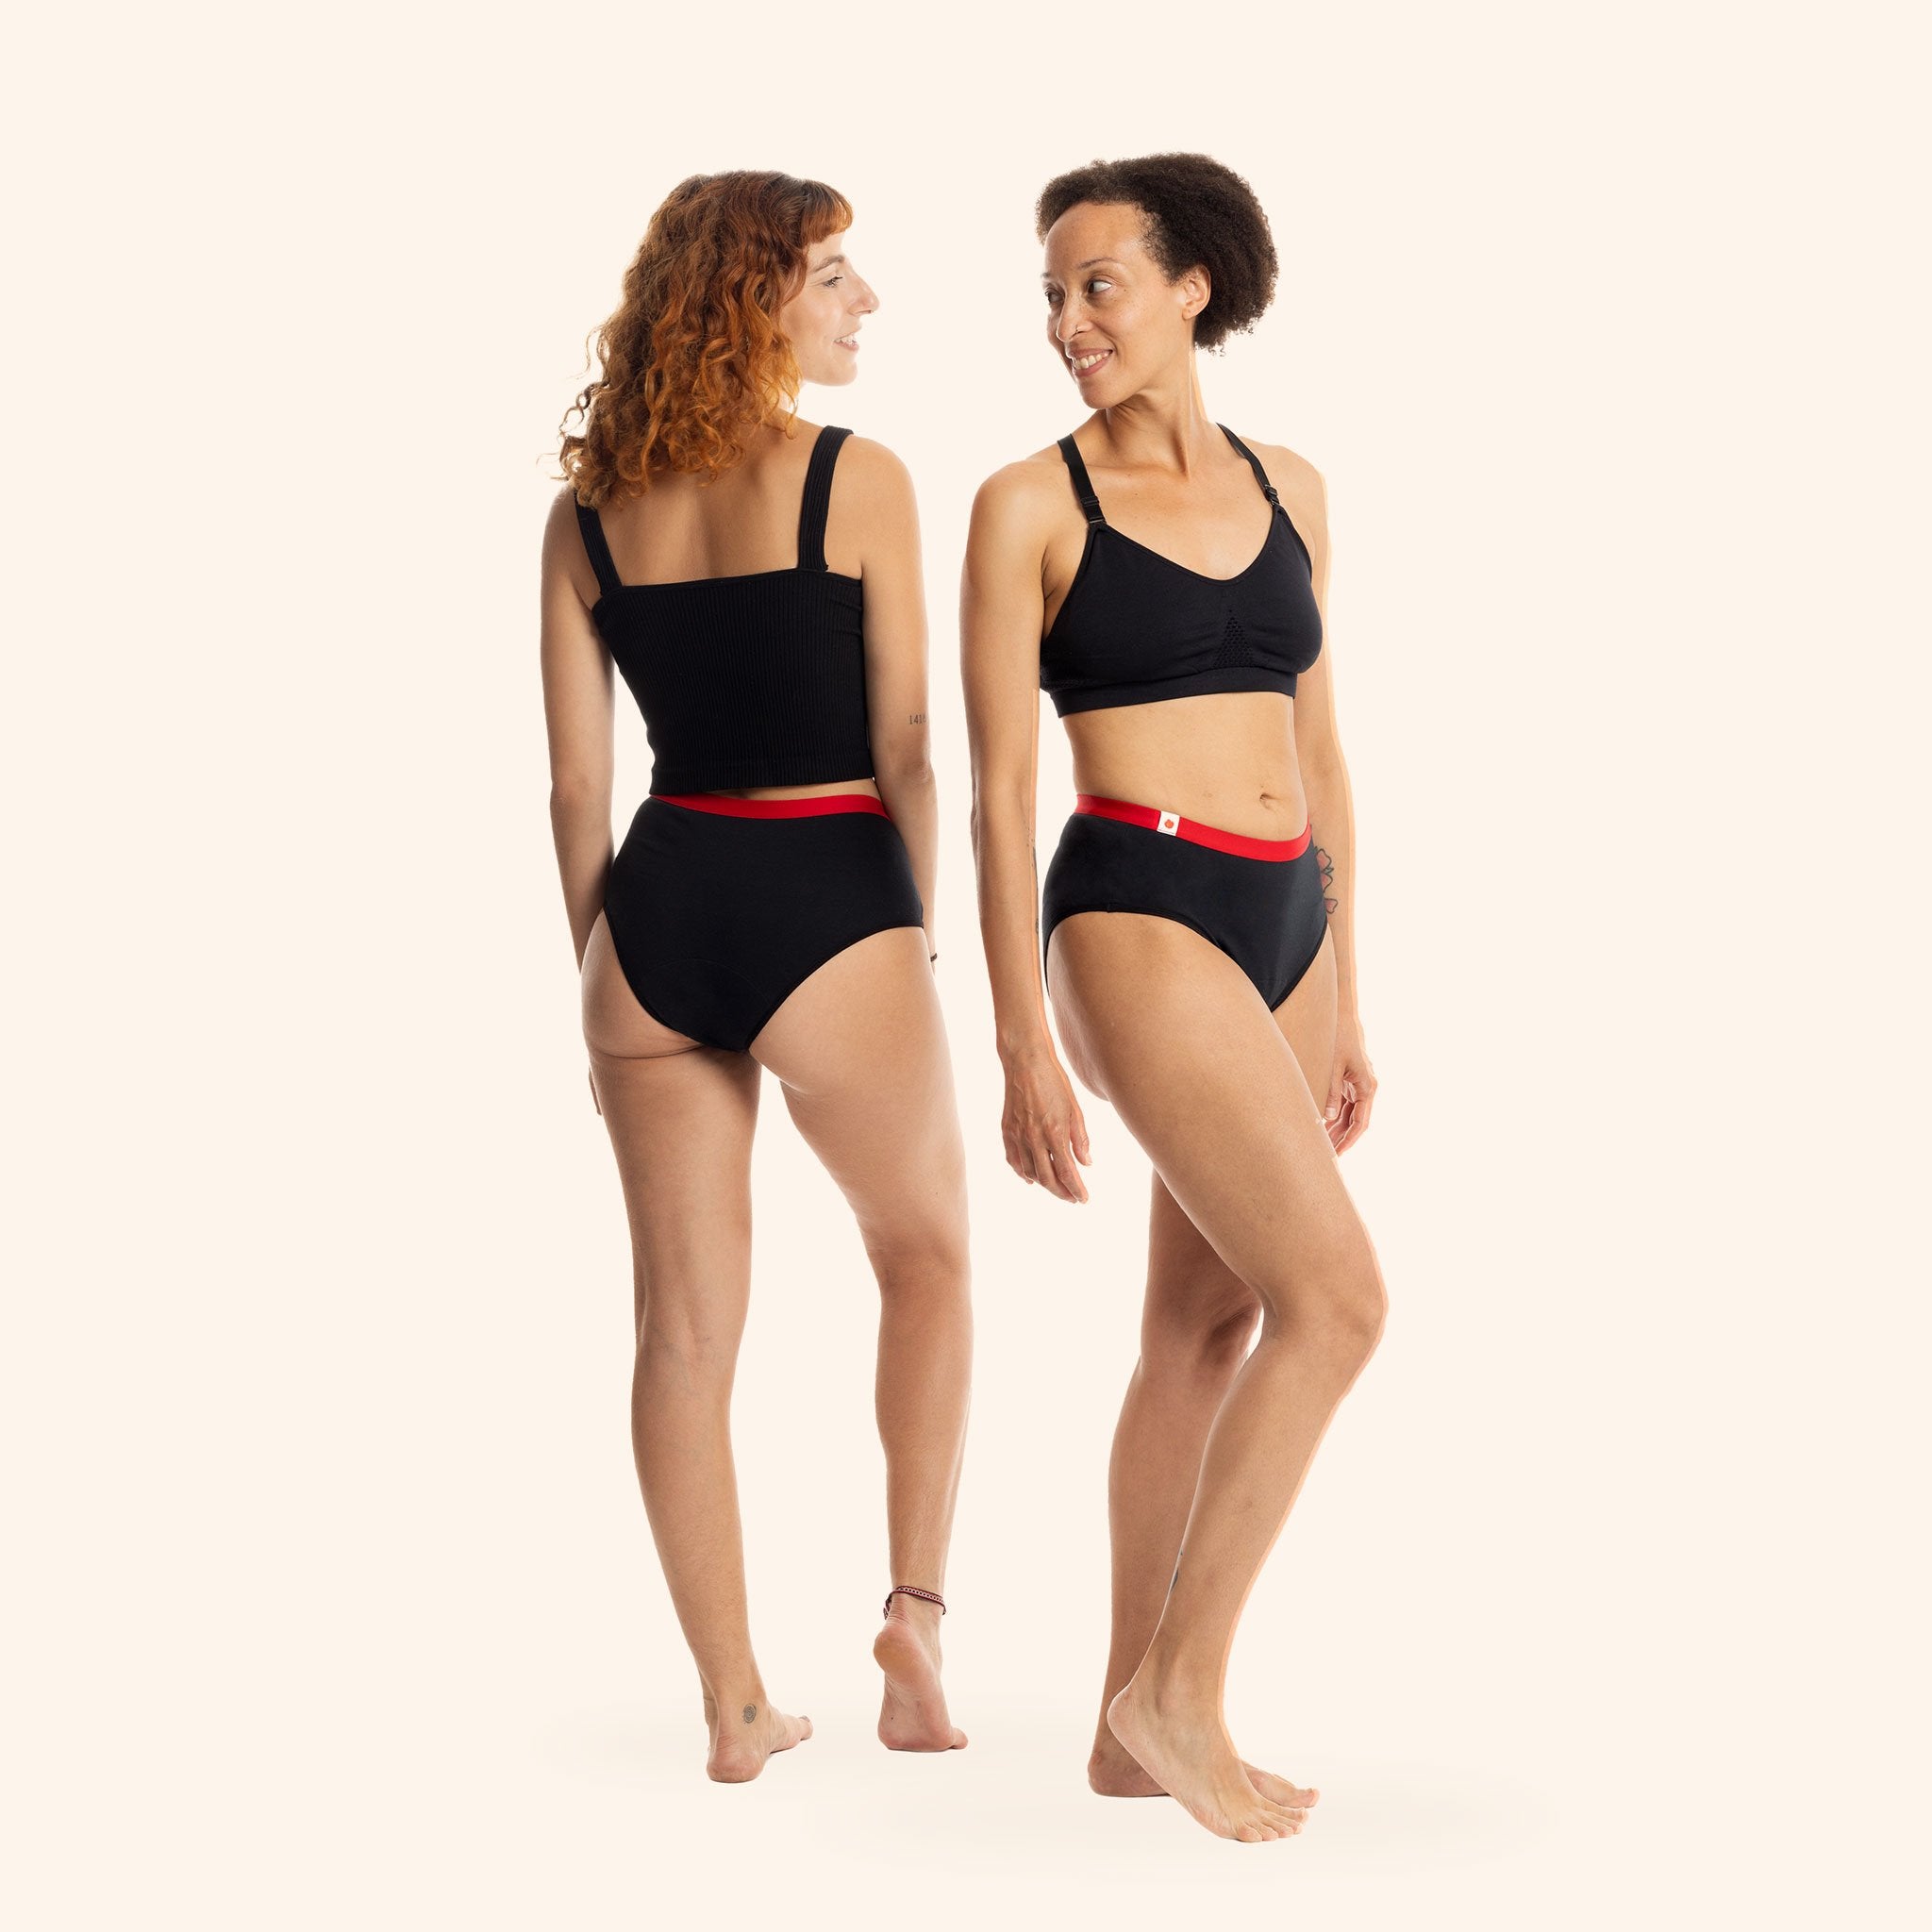 The Highty high-waisted period underwear